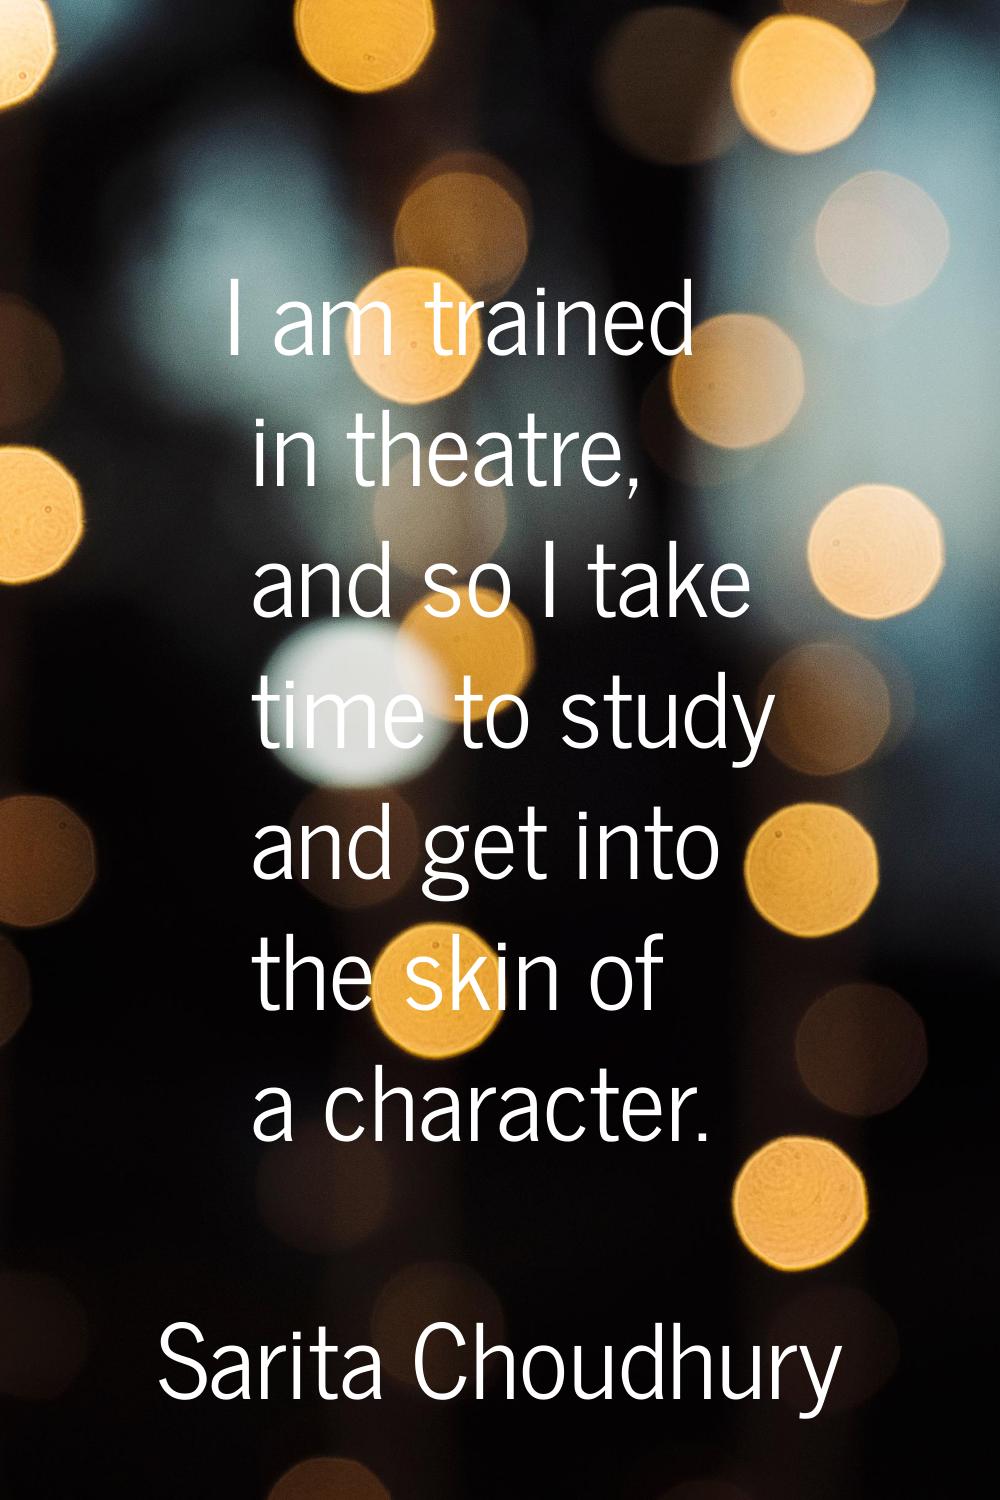 I am trained in theatre, and so I take time to study and get into the skin of a character.